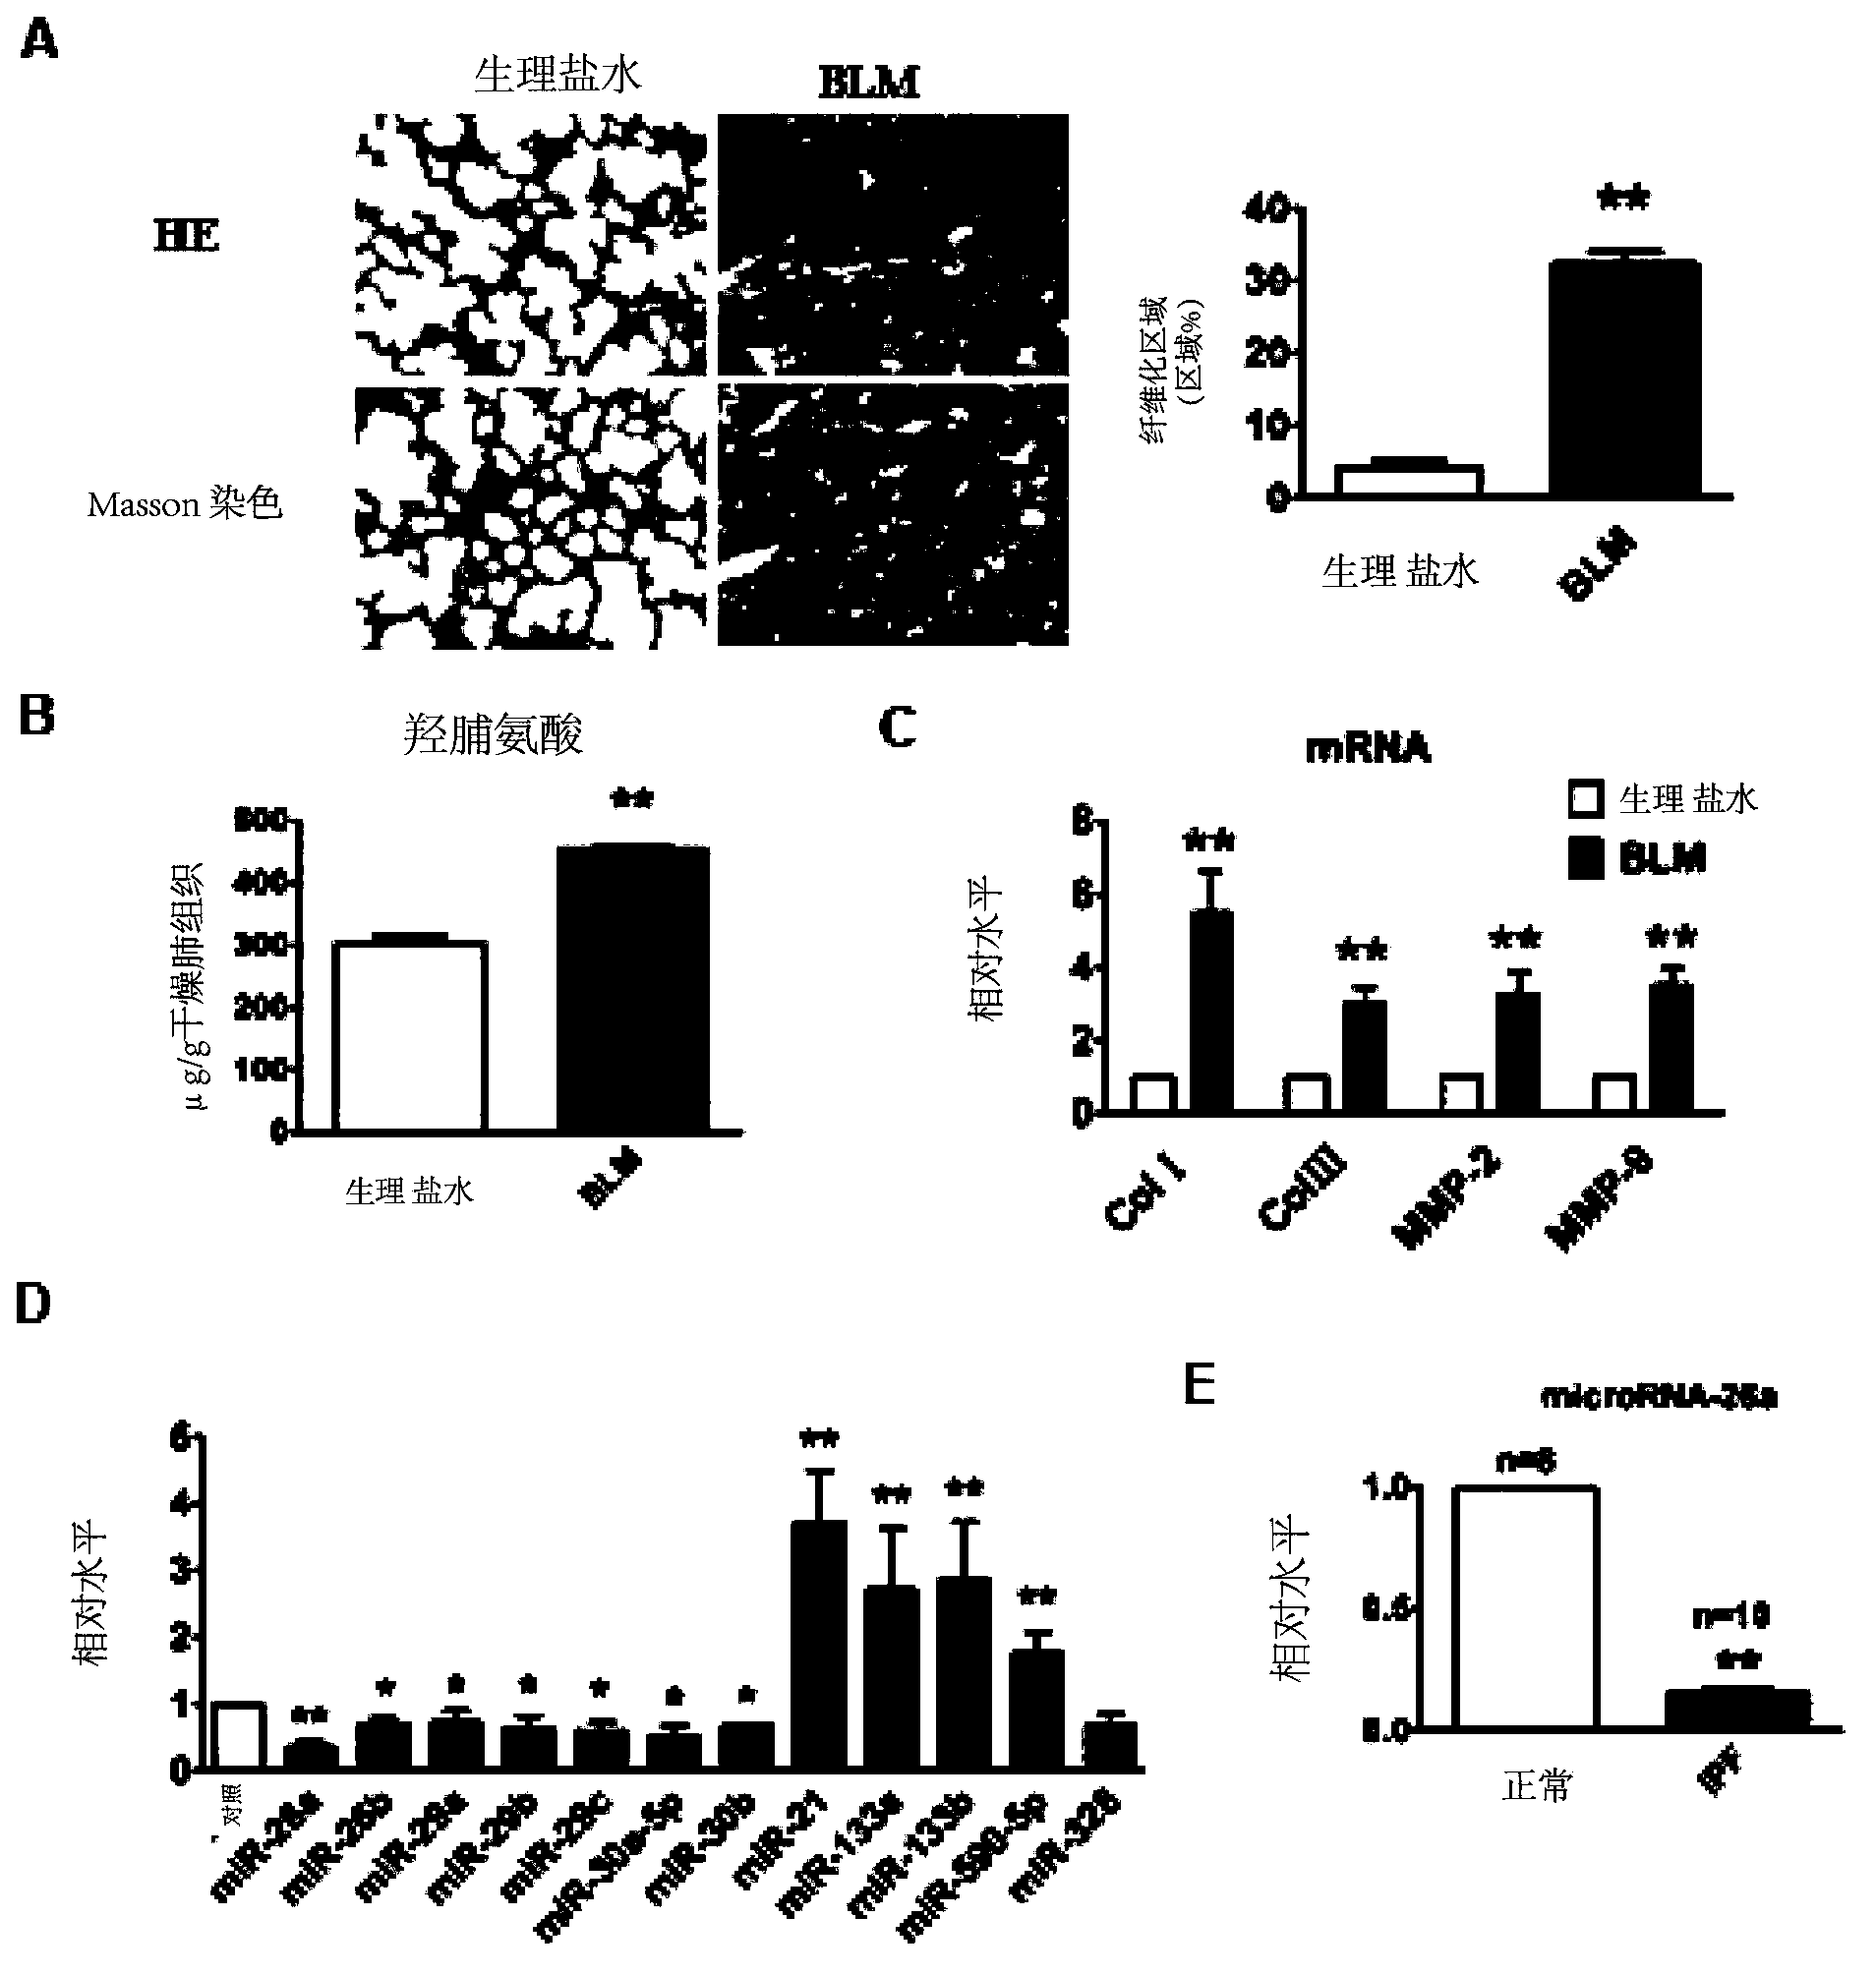 Application of microRNA-26a in preparation of drug for prevention or treatment of pulmonary fibrosis